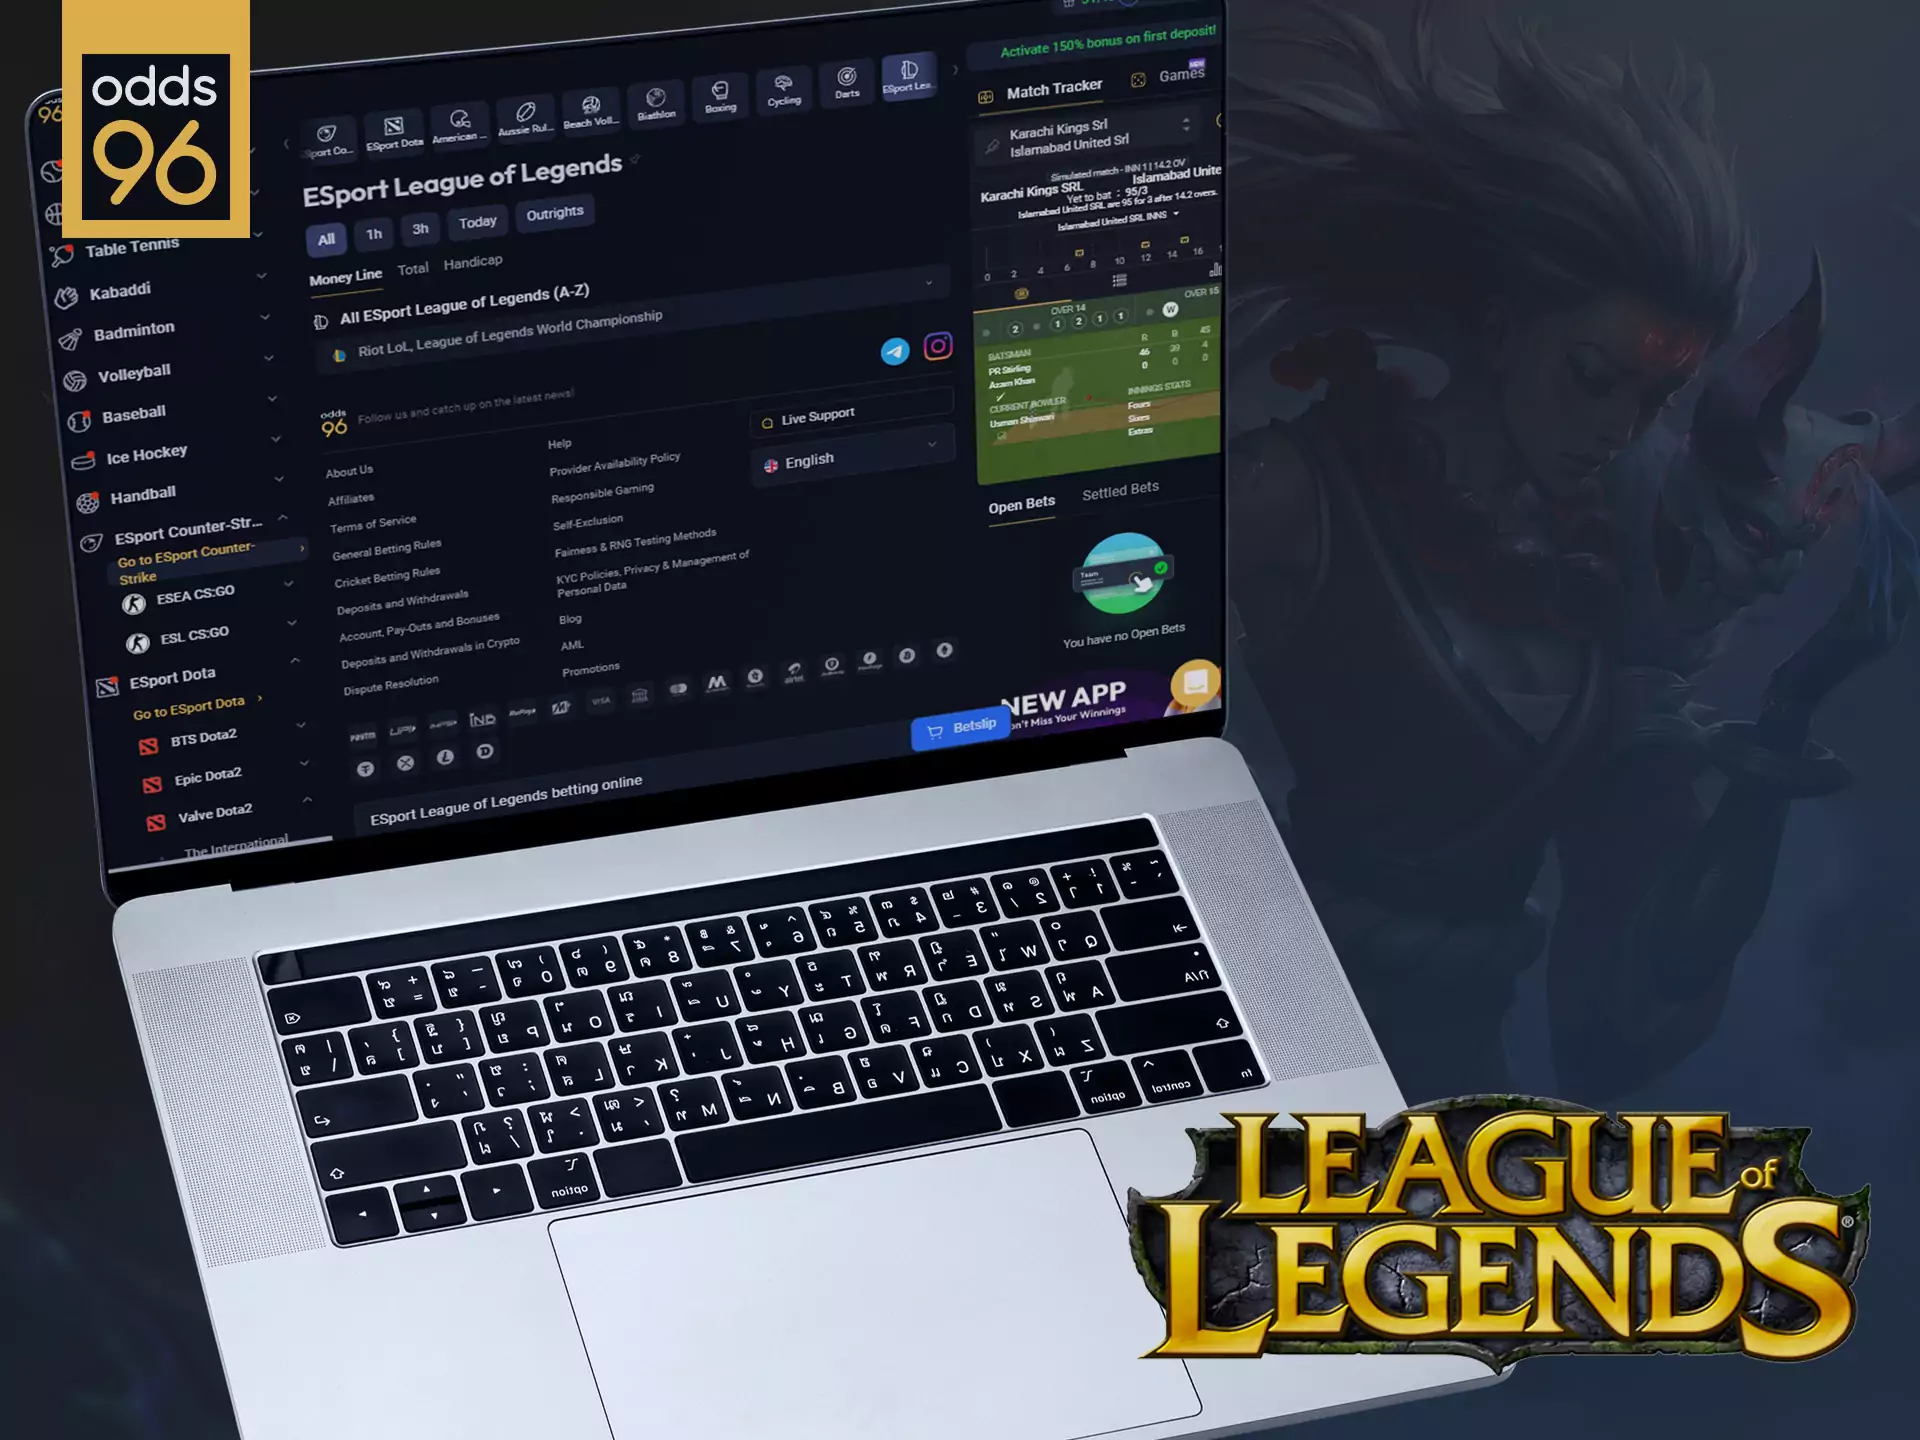 Place bets in Odds96 on League of Legends.